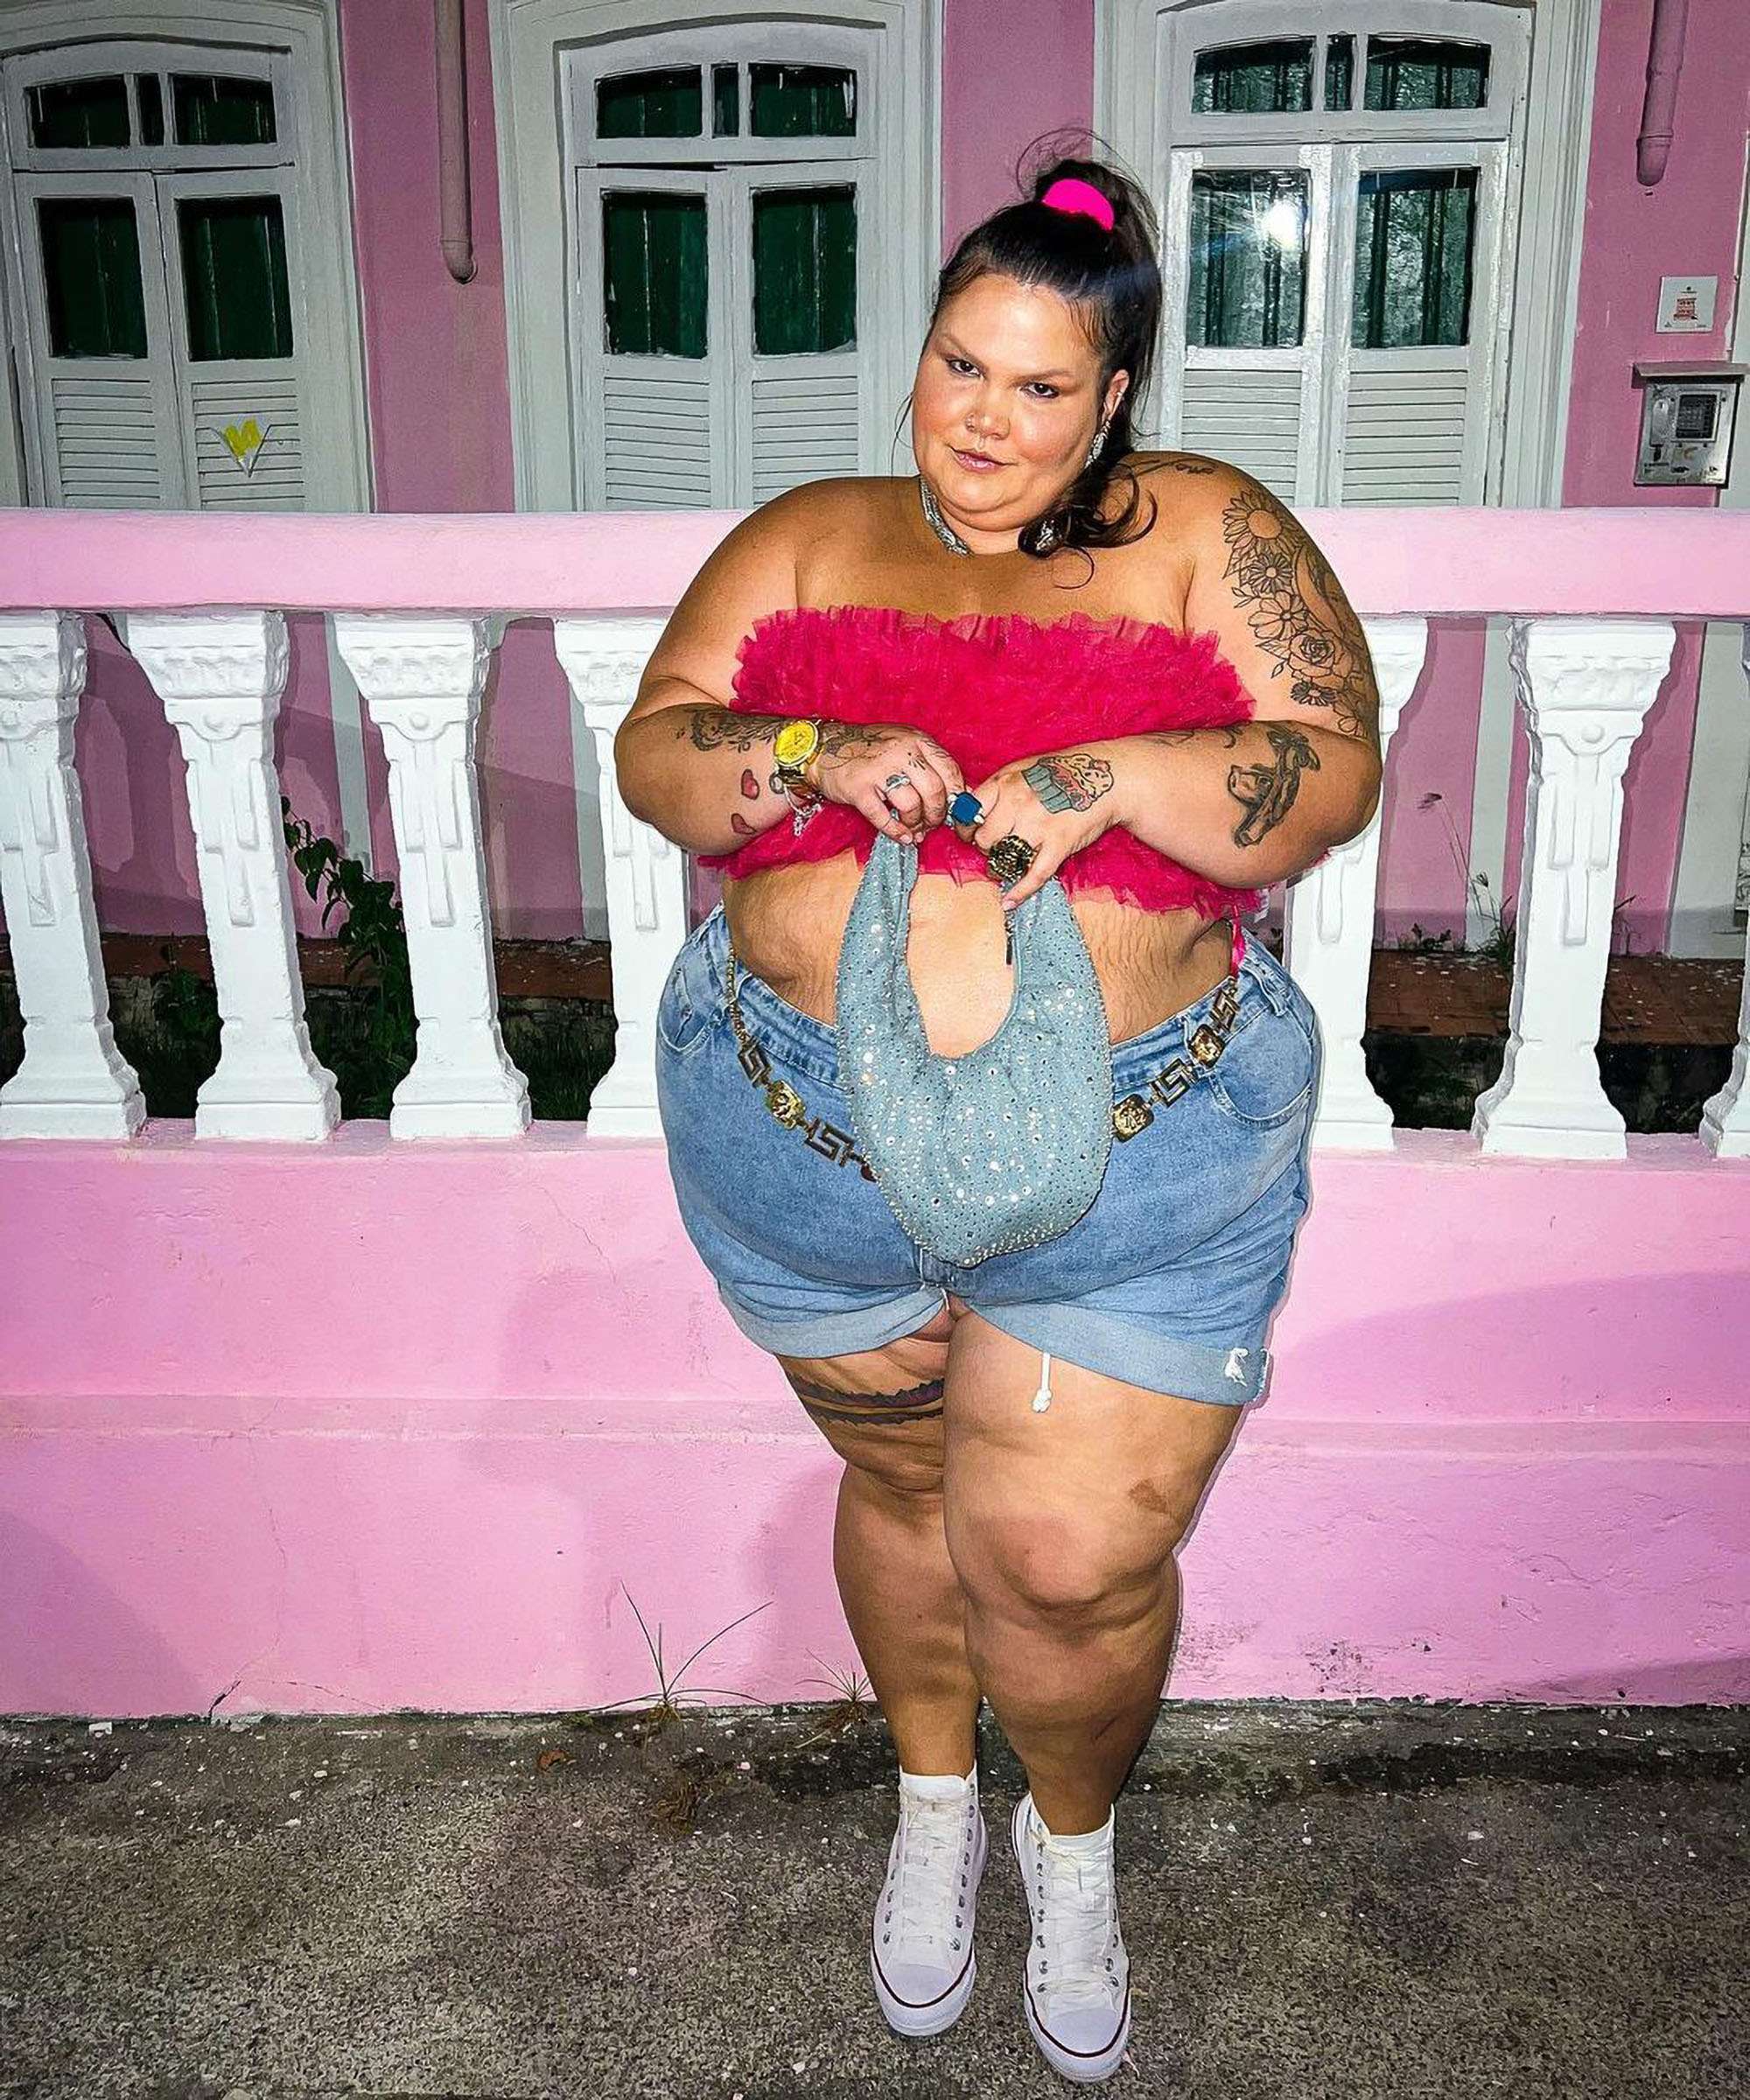 Read more about the article  Plus-Sized Influencer Sues Politician For Body-Shaming Her